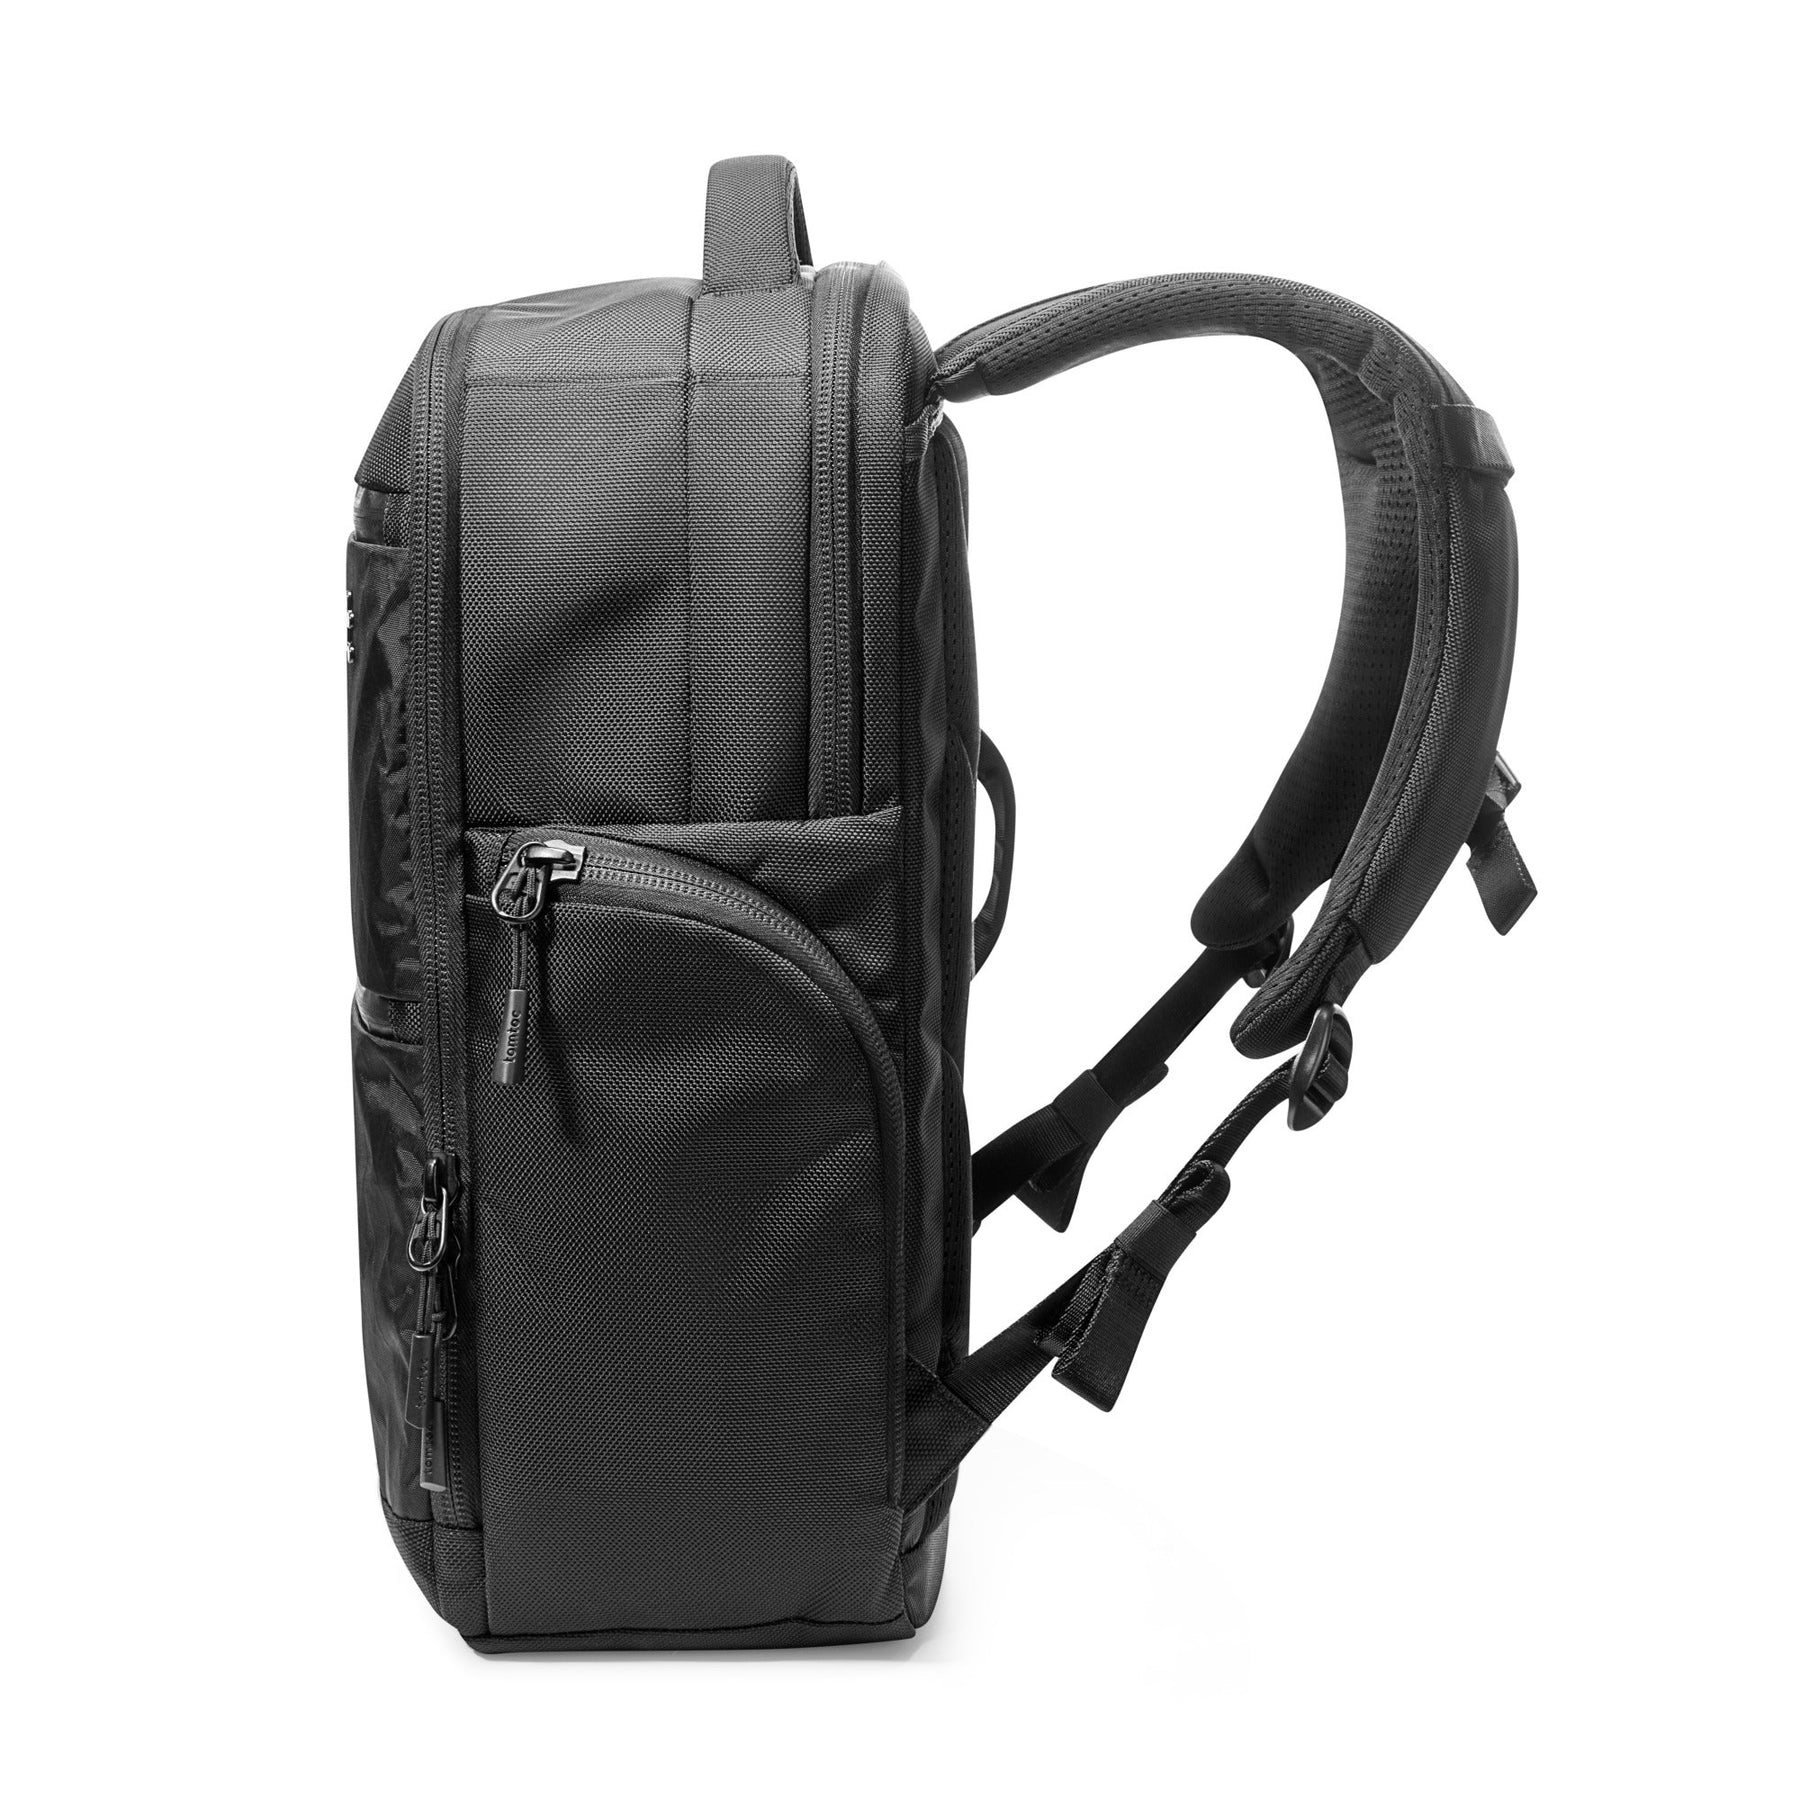 TechPack-T73 X-Pac Laptop Backpack 20L